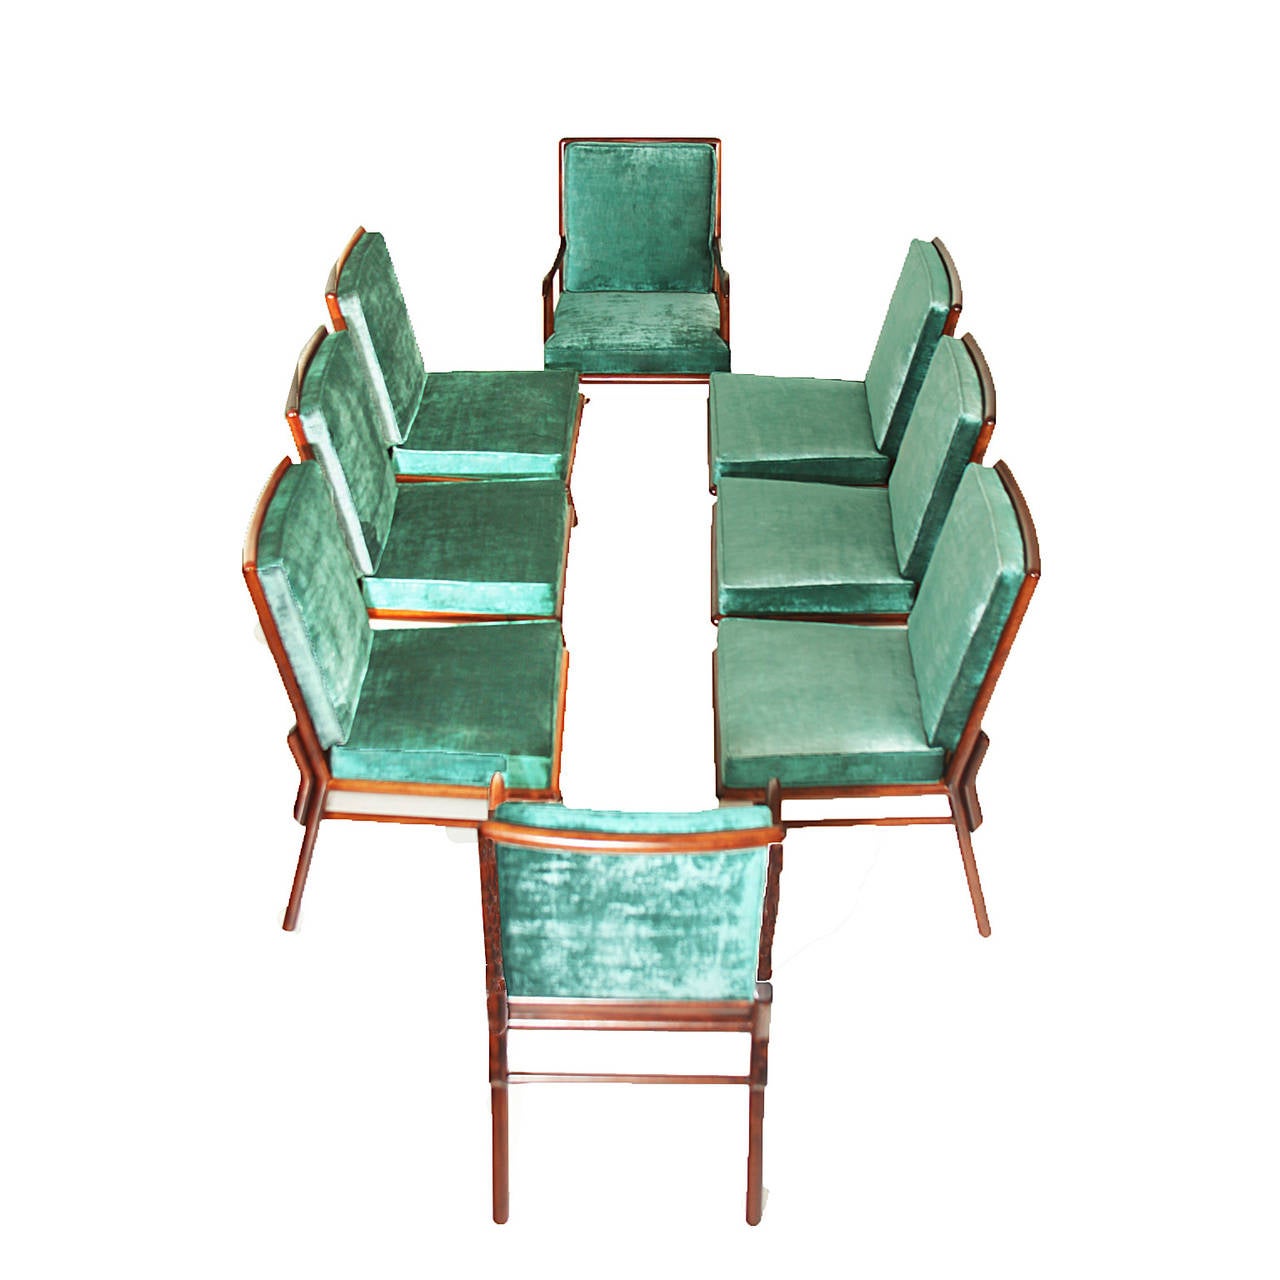 A set of eight Robsjohn Gibbings dining chairs for Widdicomb in a solid walnut upholstered in a velvet teal.

Many pieces are stored in our warehouse, so please click CONTACT DEALER to find out if the pieces you are interested in seeing are on the